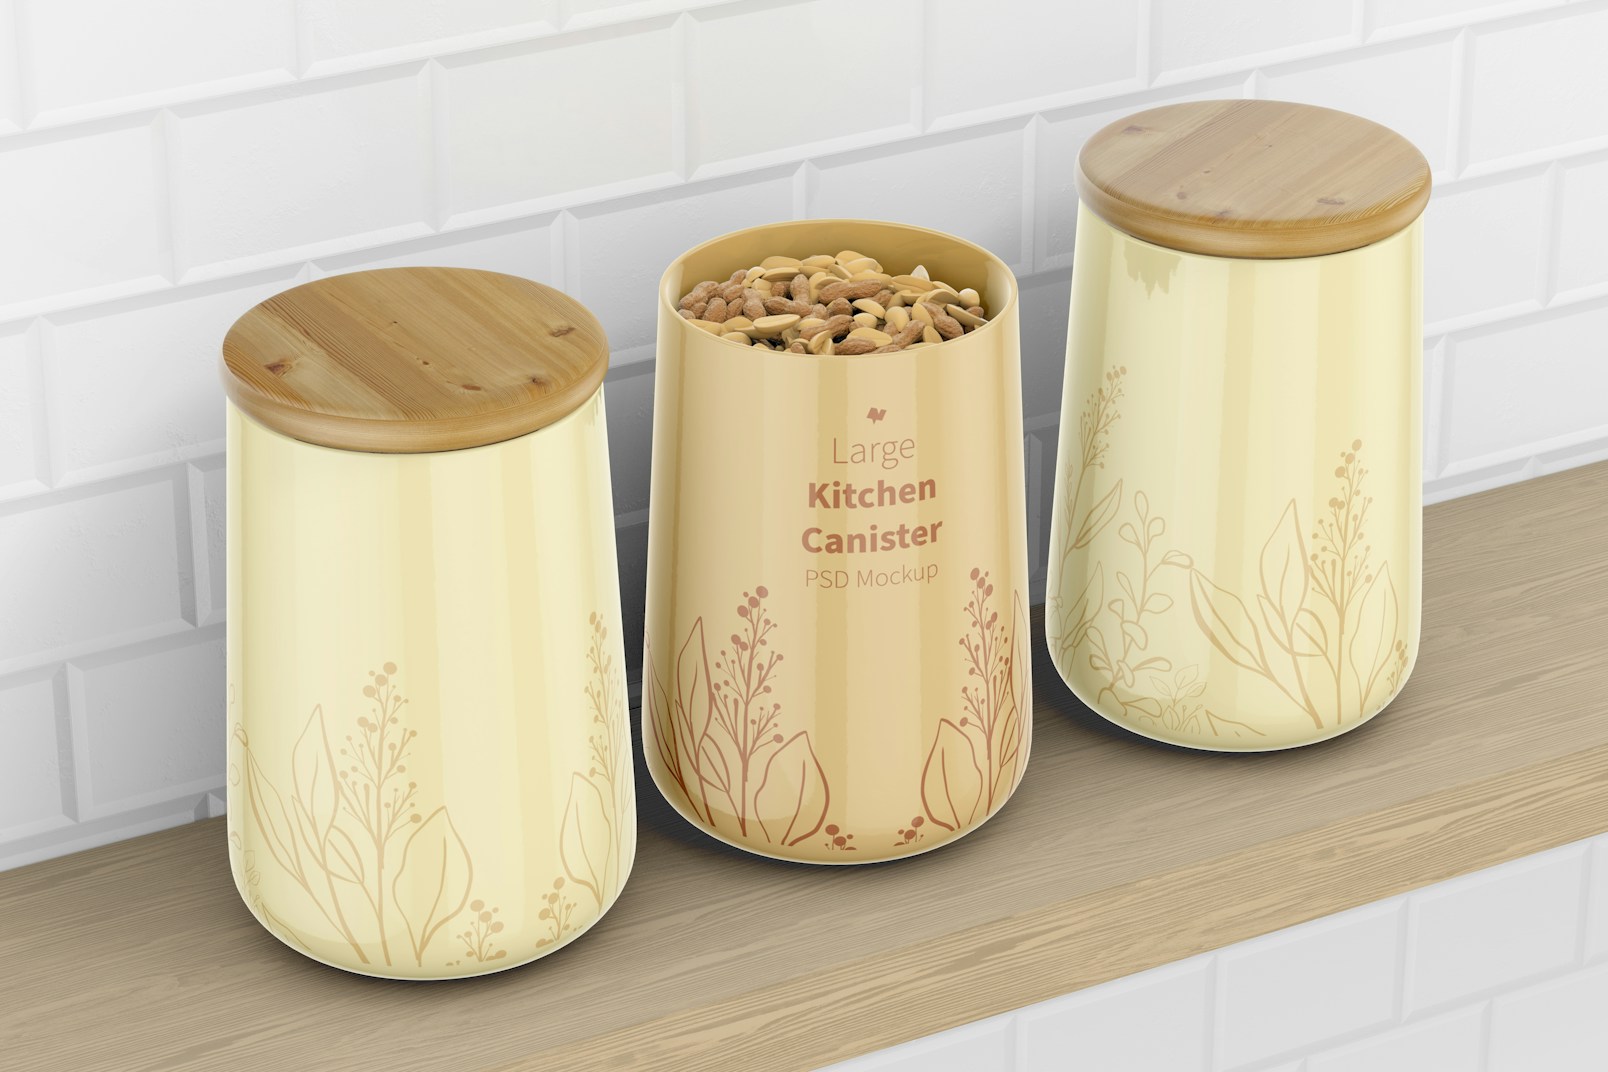 Large Kitchen Canisters Mockup